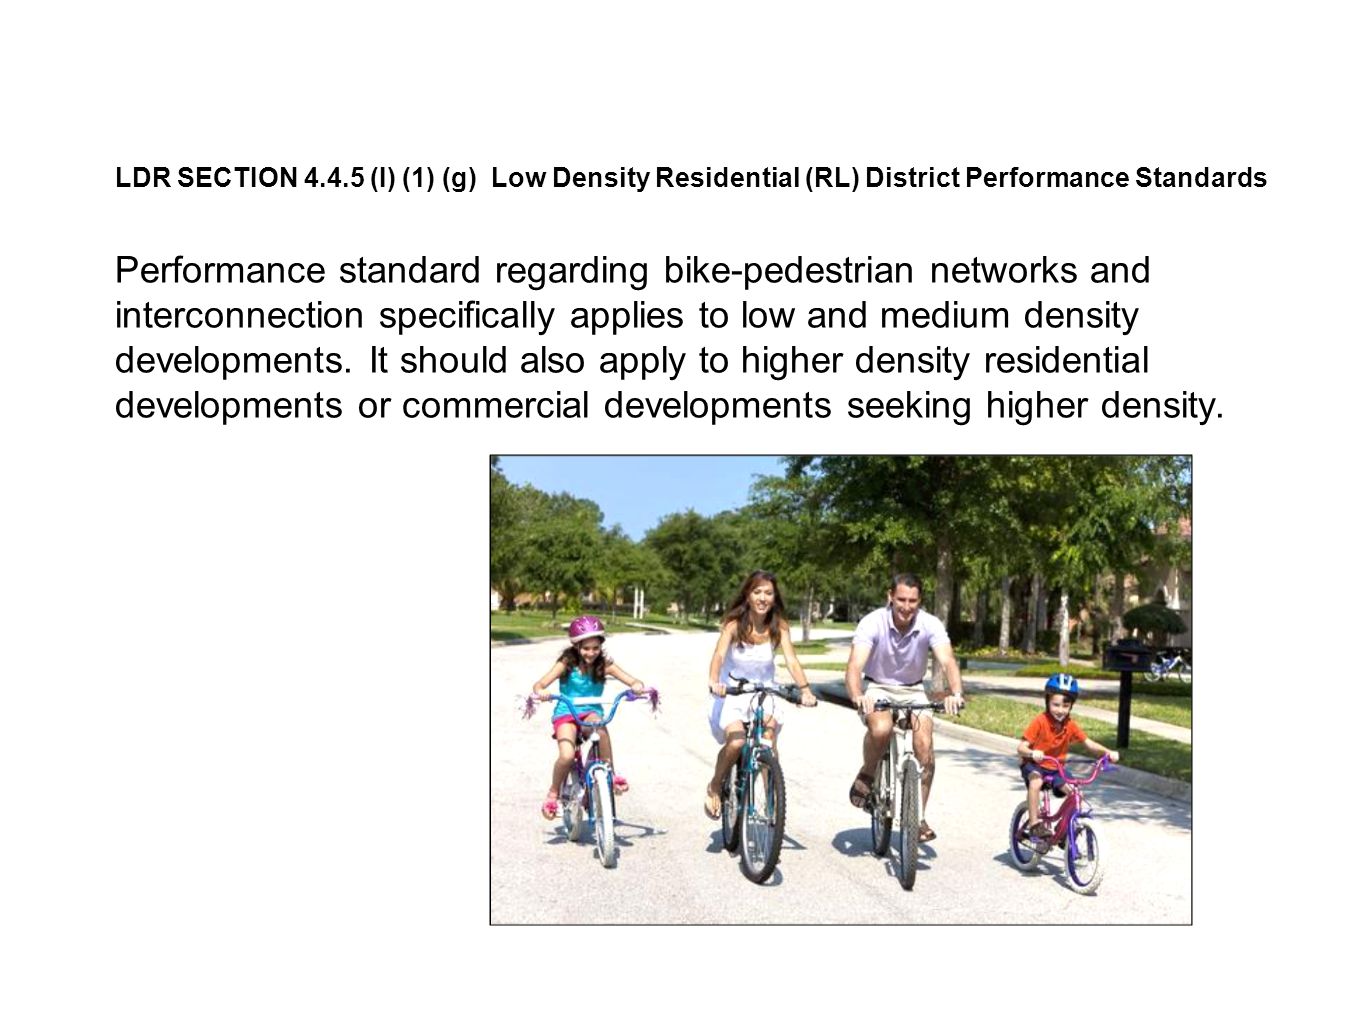 LDR SECTION (I) (1) (g) Low Density Residential (RL) District Performance Standards Performance standard regarding bike-pedestrian networks and interconnection specifically applies to low and medium density developments.